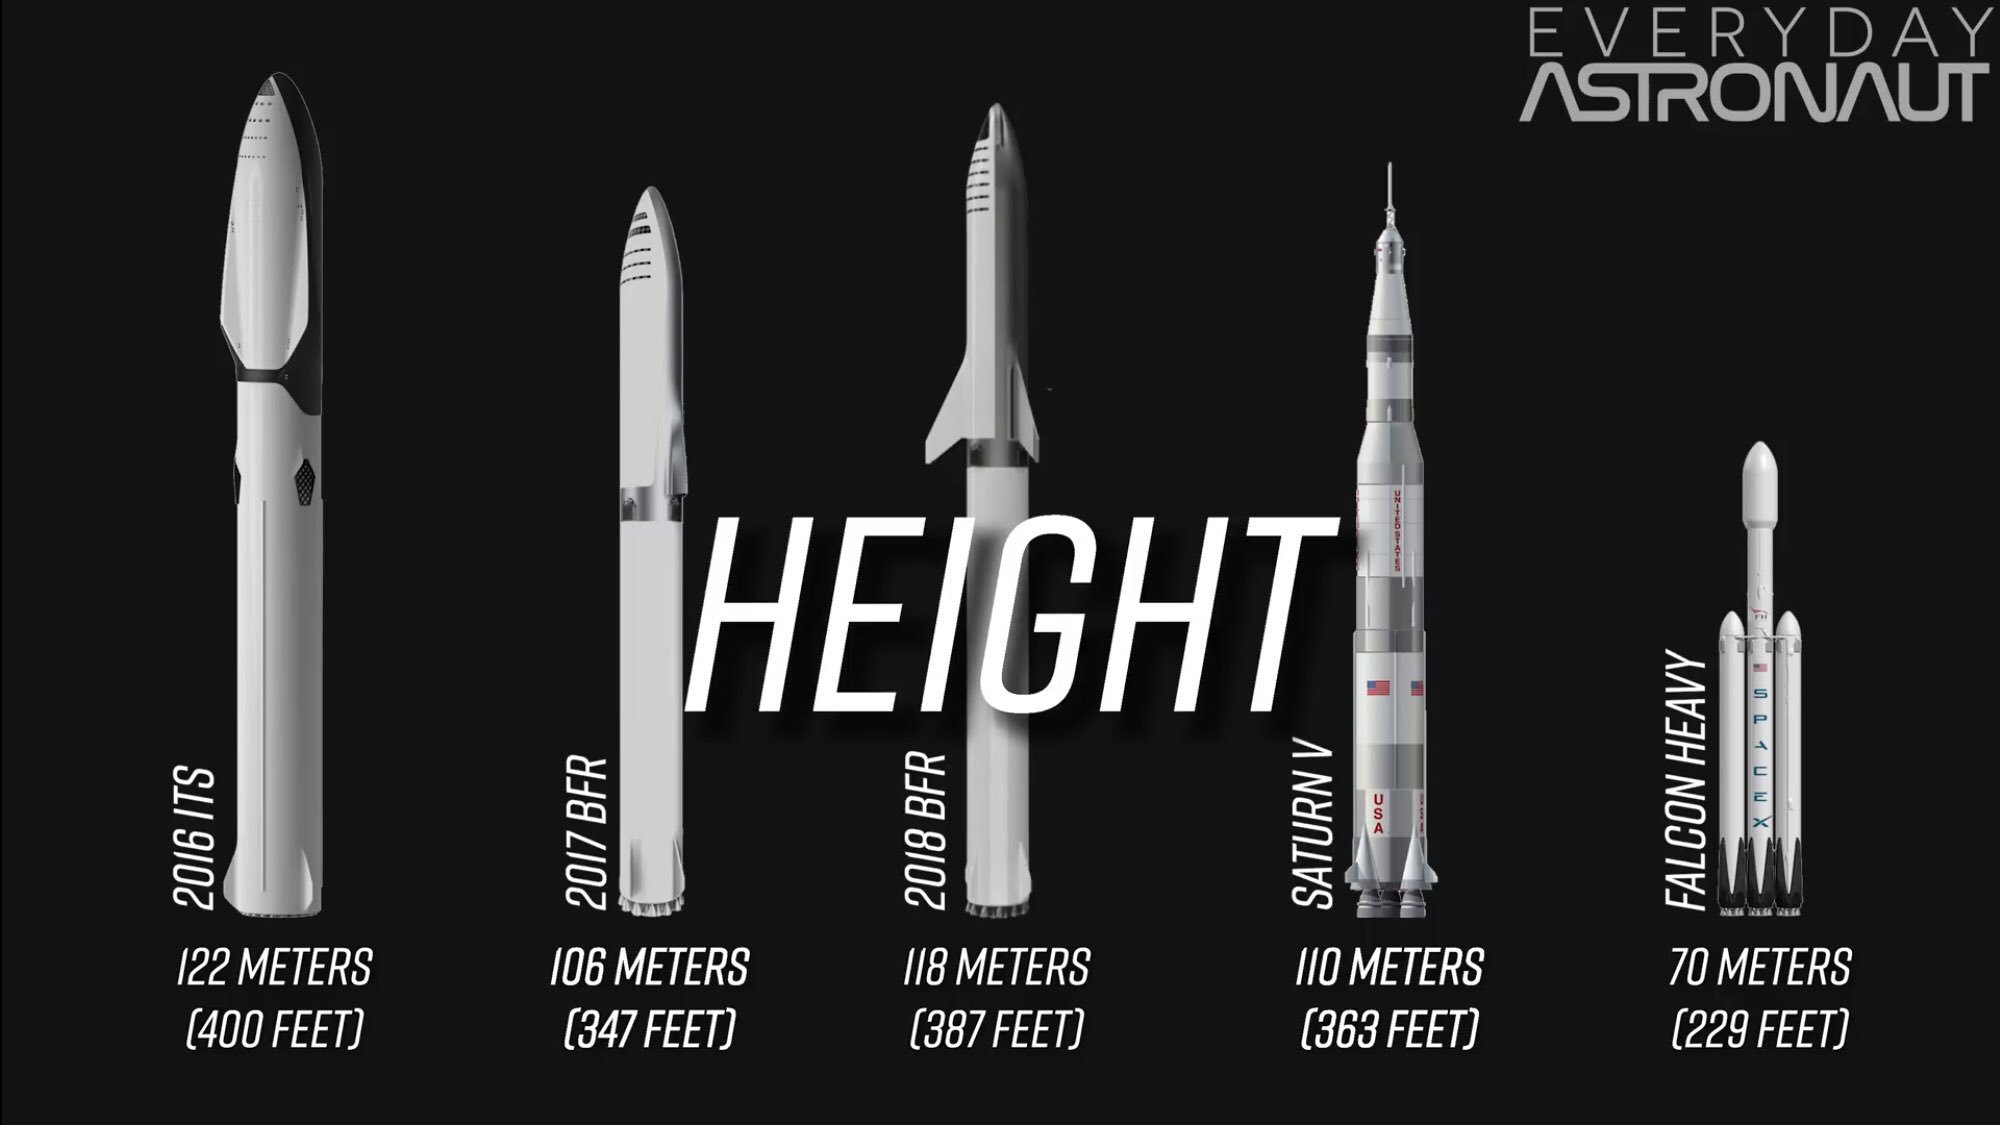 Everyday Astronaut on Twitter: "Some graphics to eat up ...